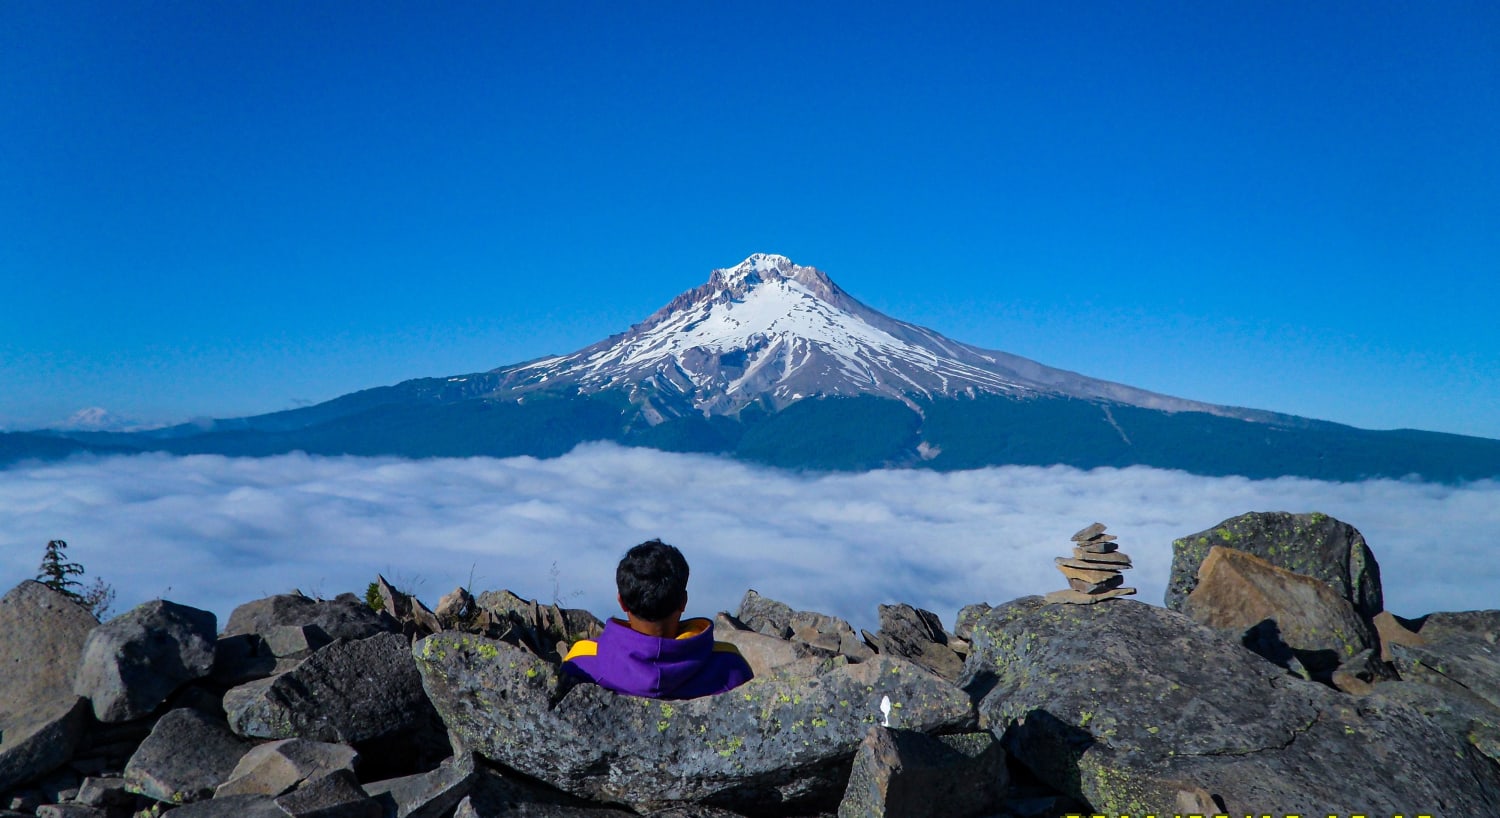 If you can't avoid the storm, climb above it. Mother nature will reward you with the best views from her own front row seat, as I calmly learned myself at Mt Hood wilderness, Mt Hood, Oregon, USA